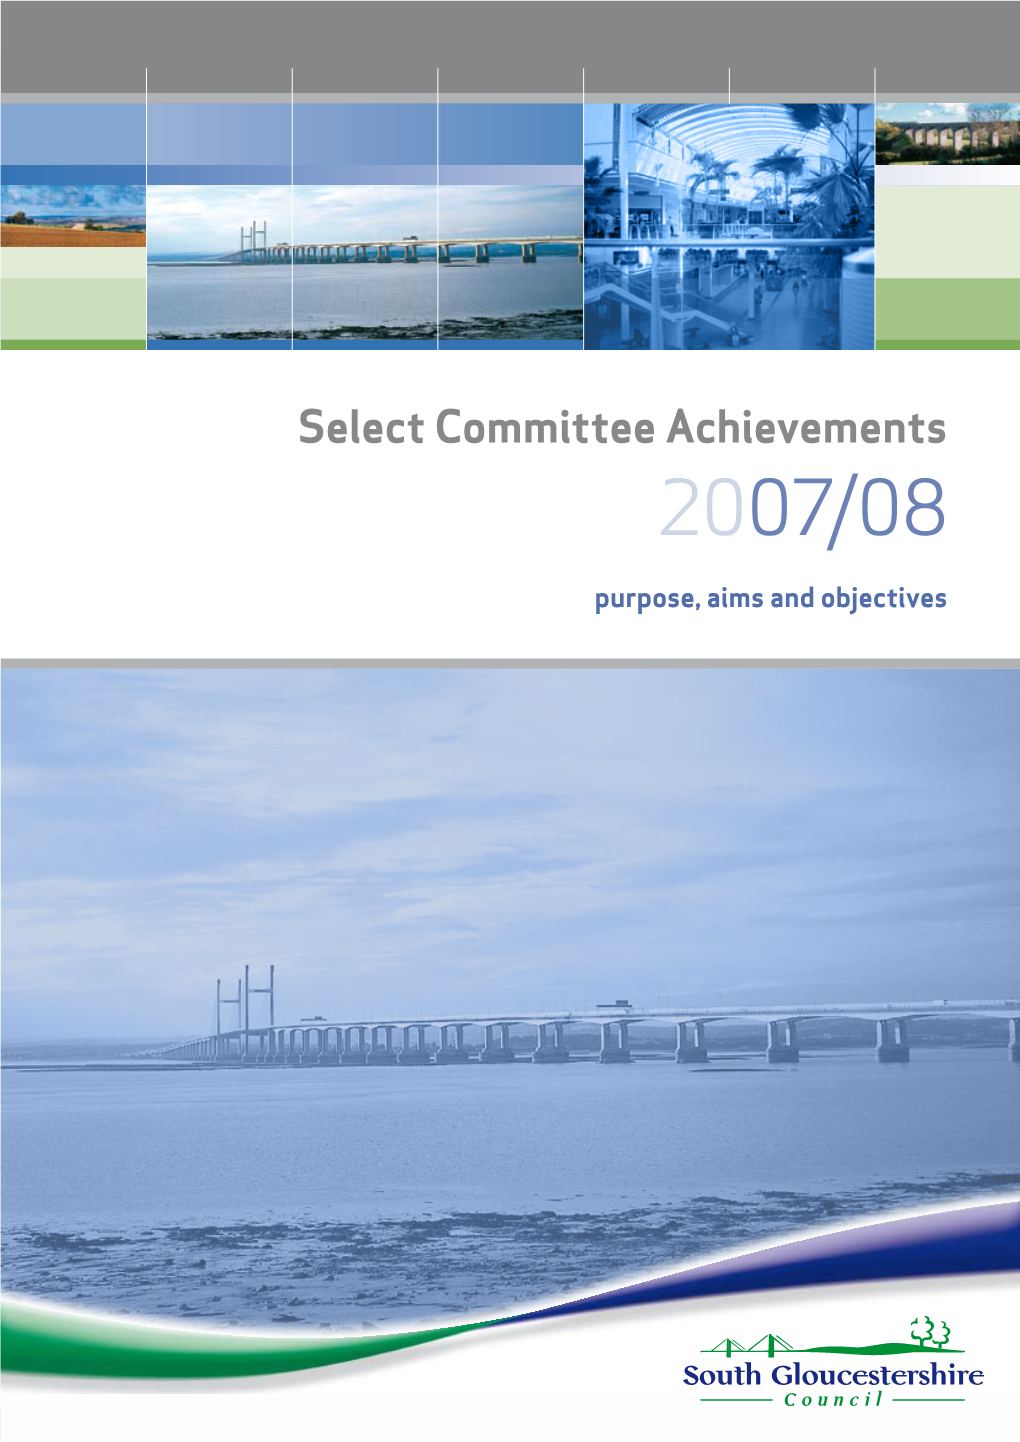 Select Committee Achievements 2007/08